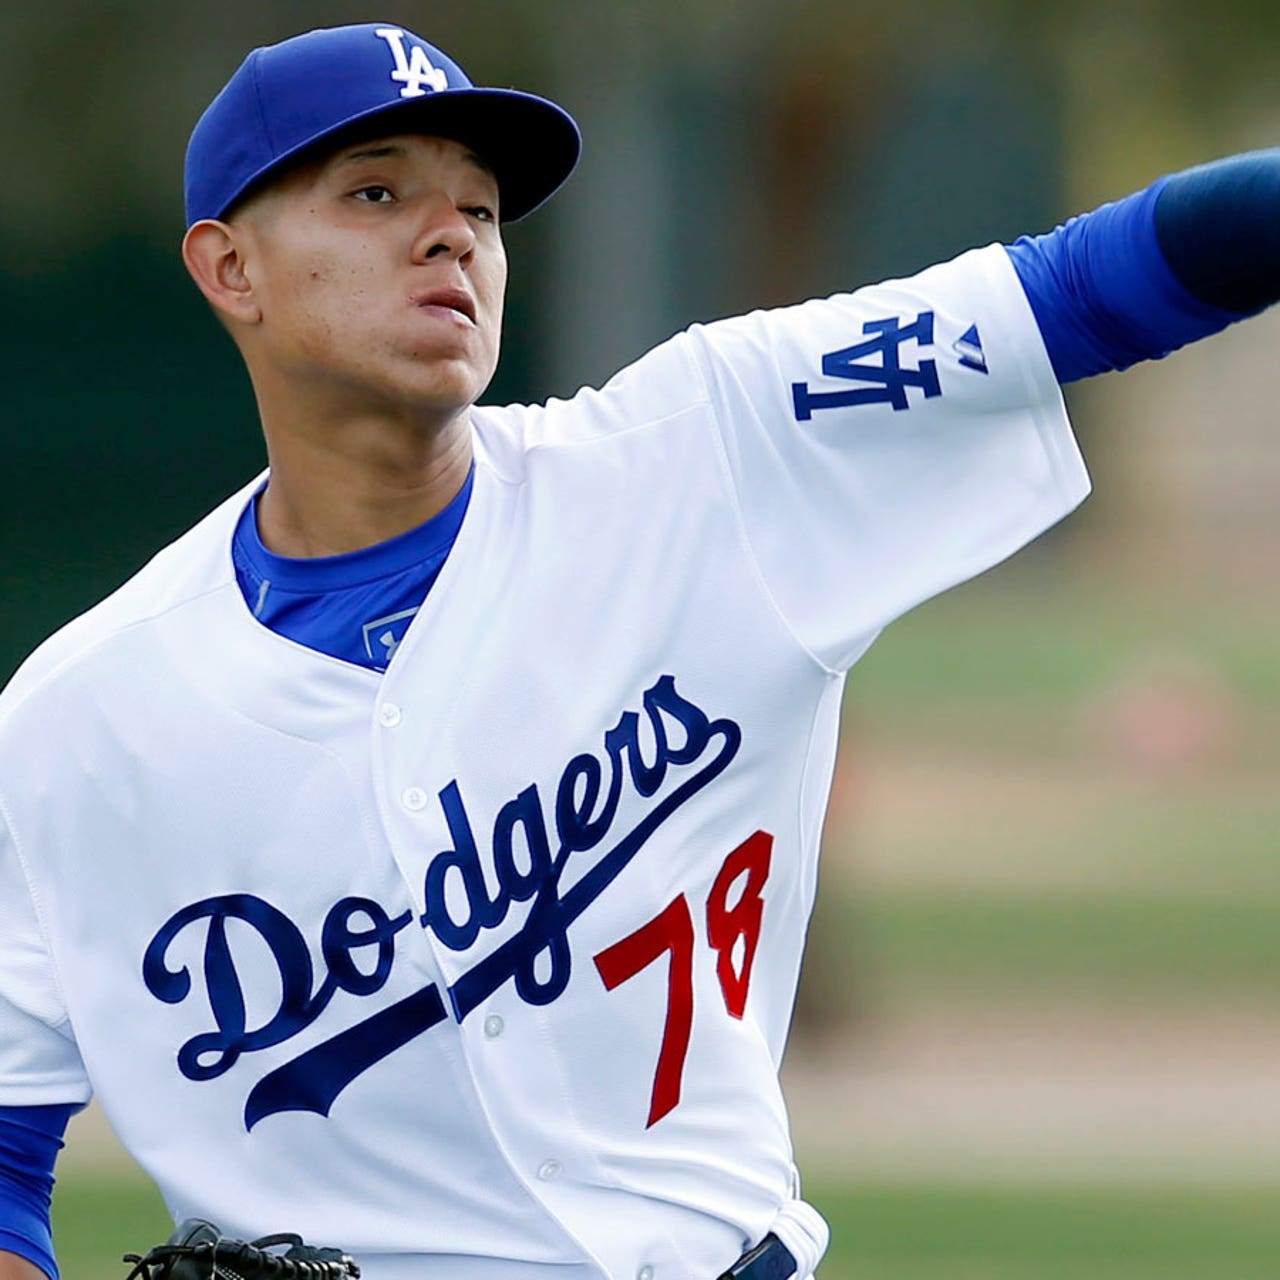 Will Dodgers call up top prospect Julio Urias to join beleaguered bullpen?